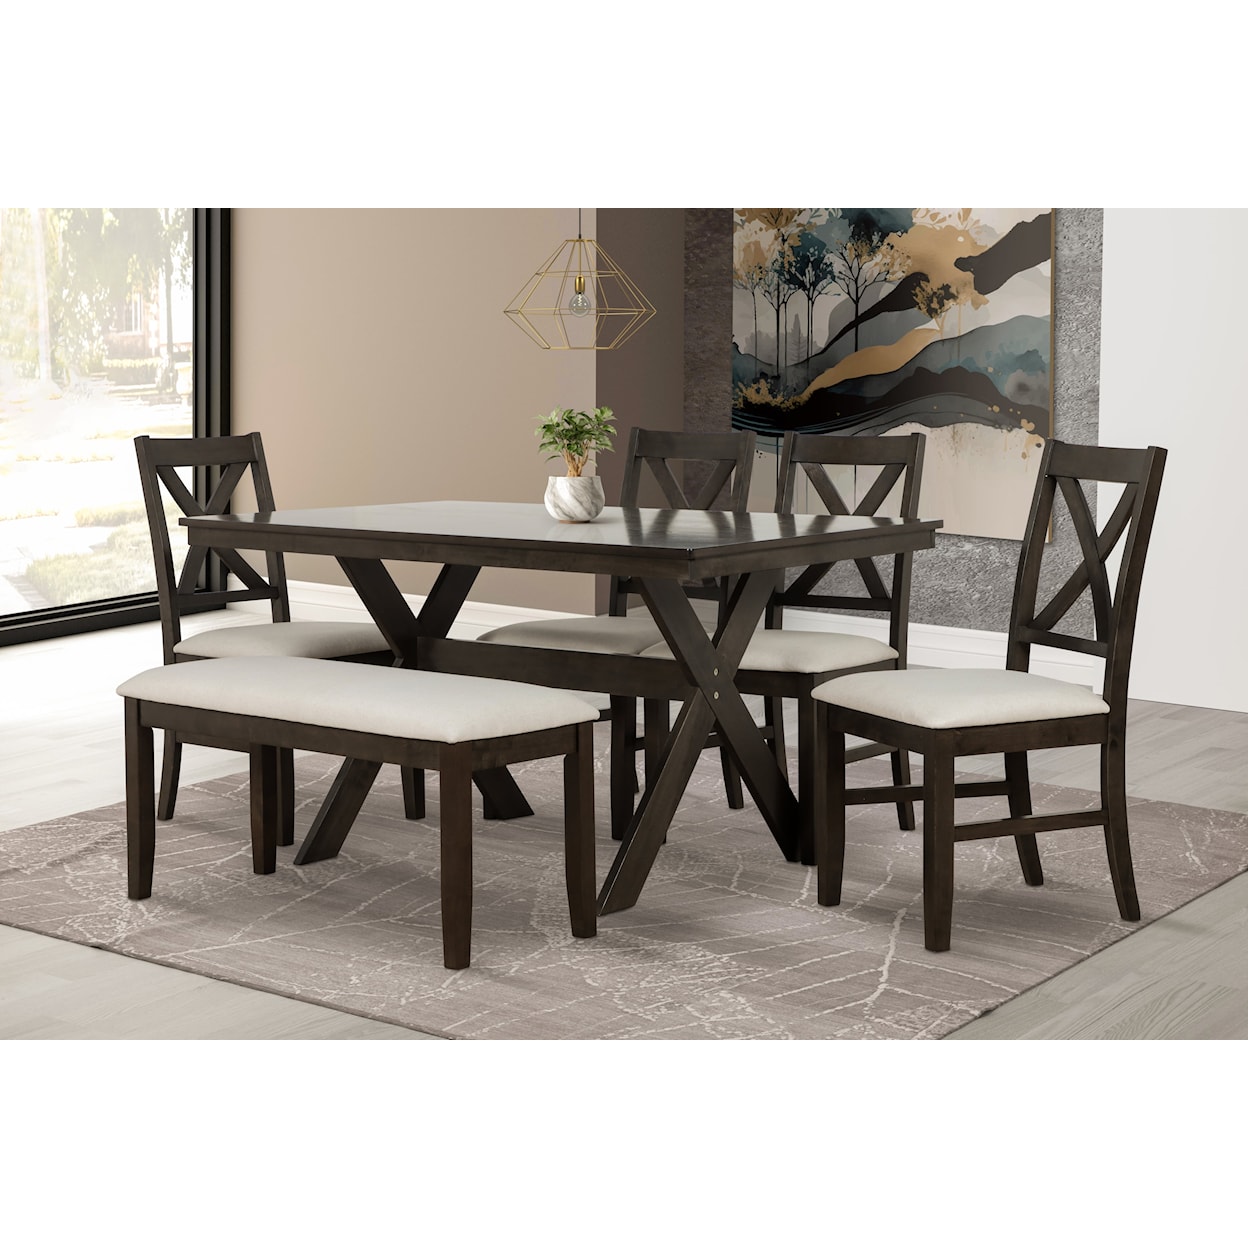 New Classic Furniture Meadows 6-Piece Dining Set